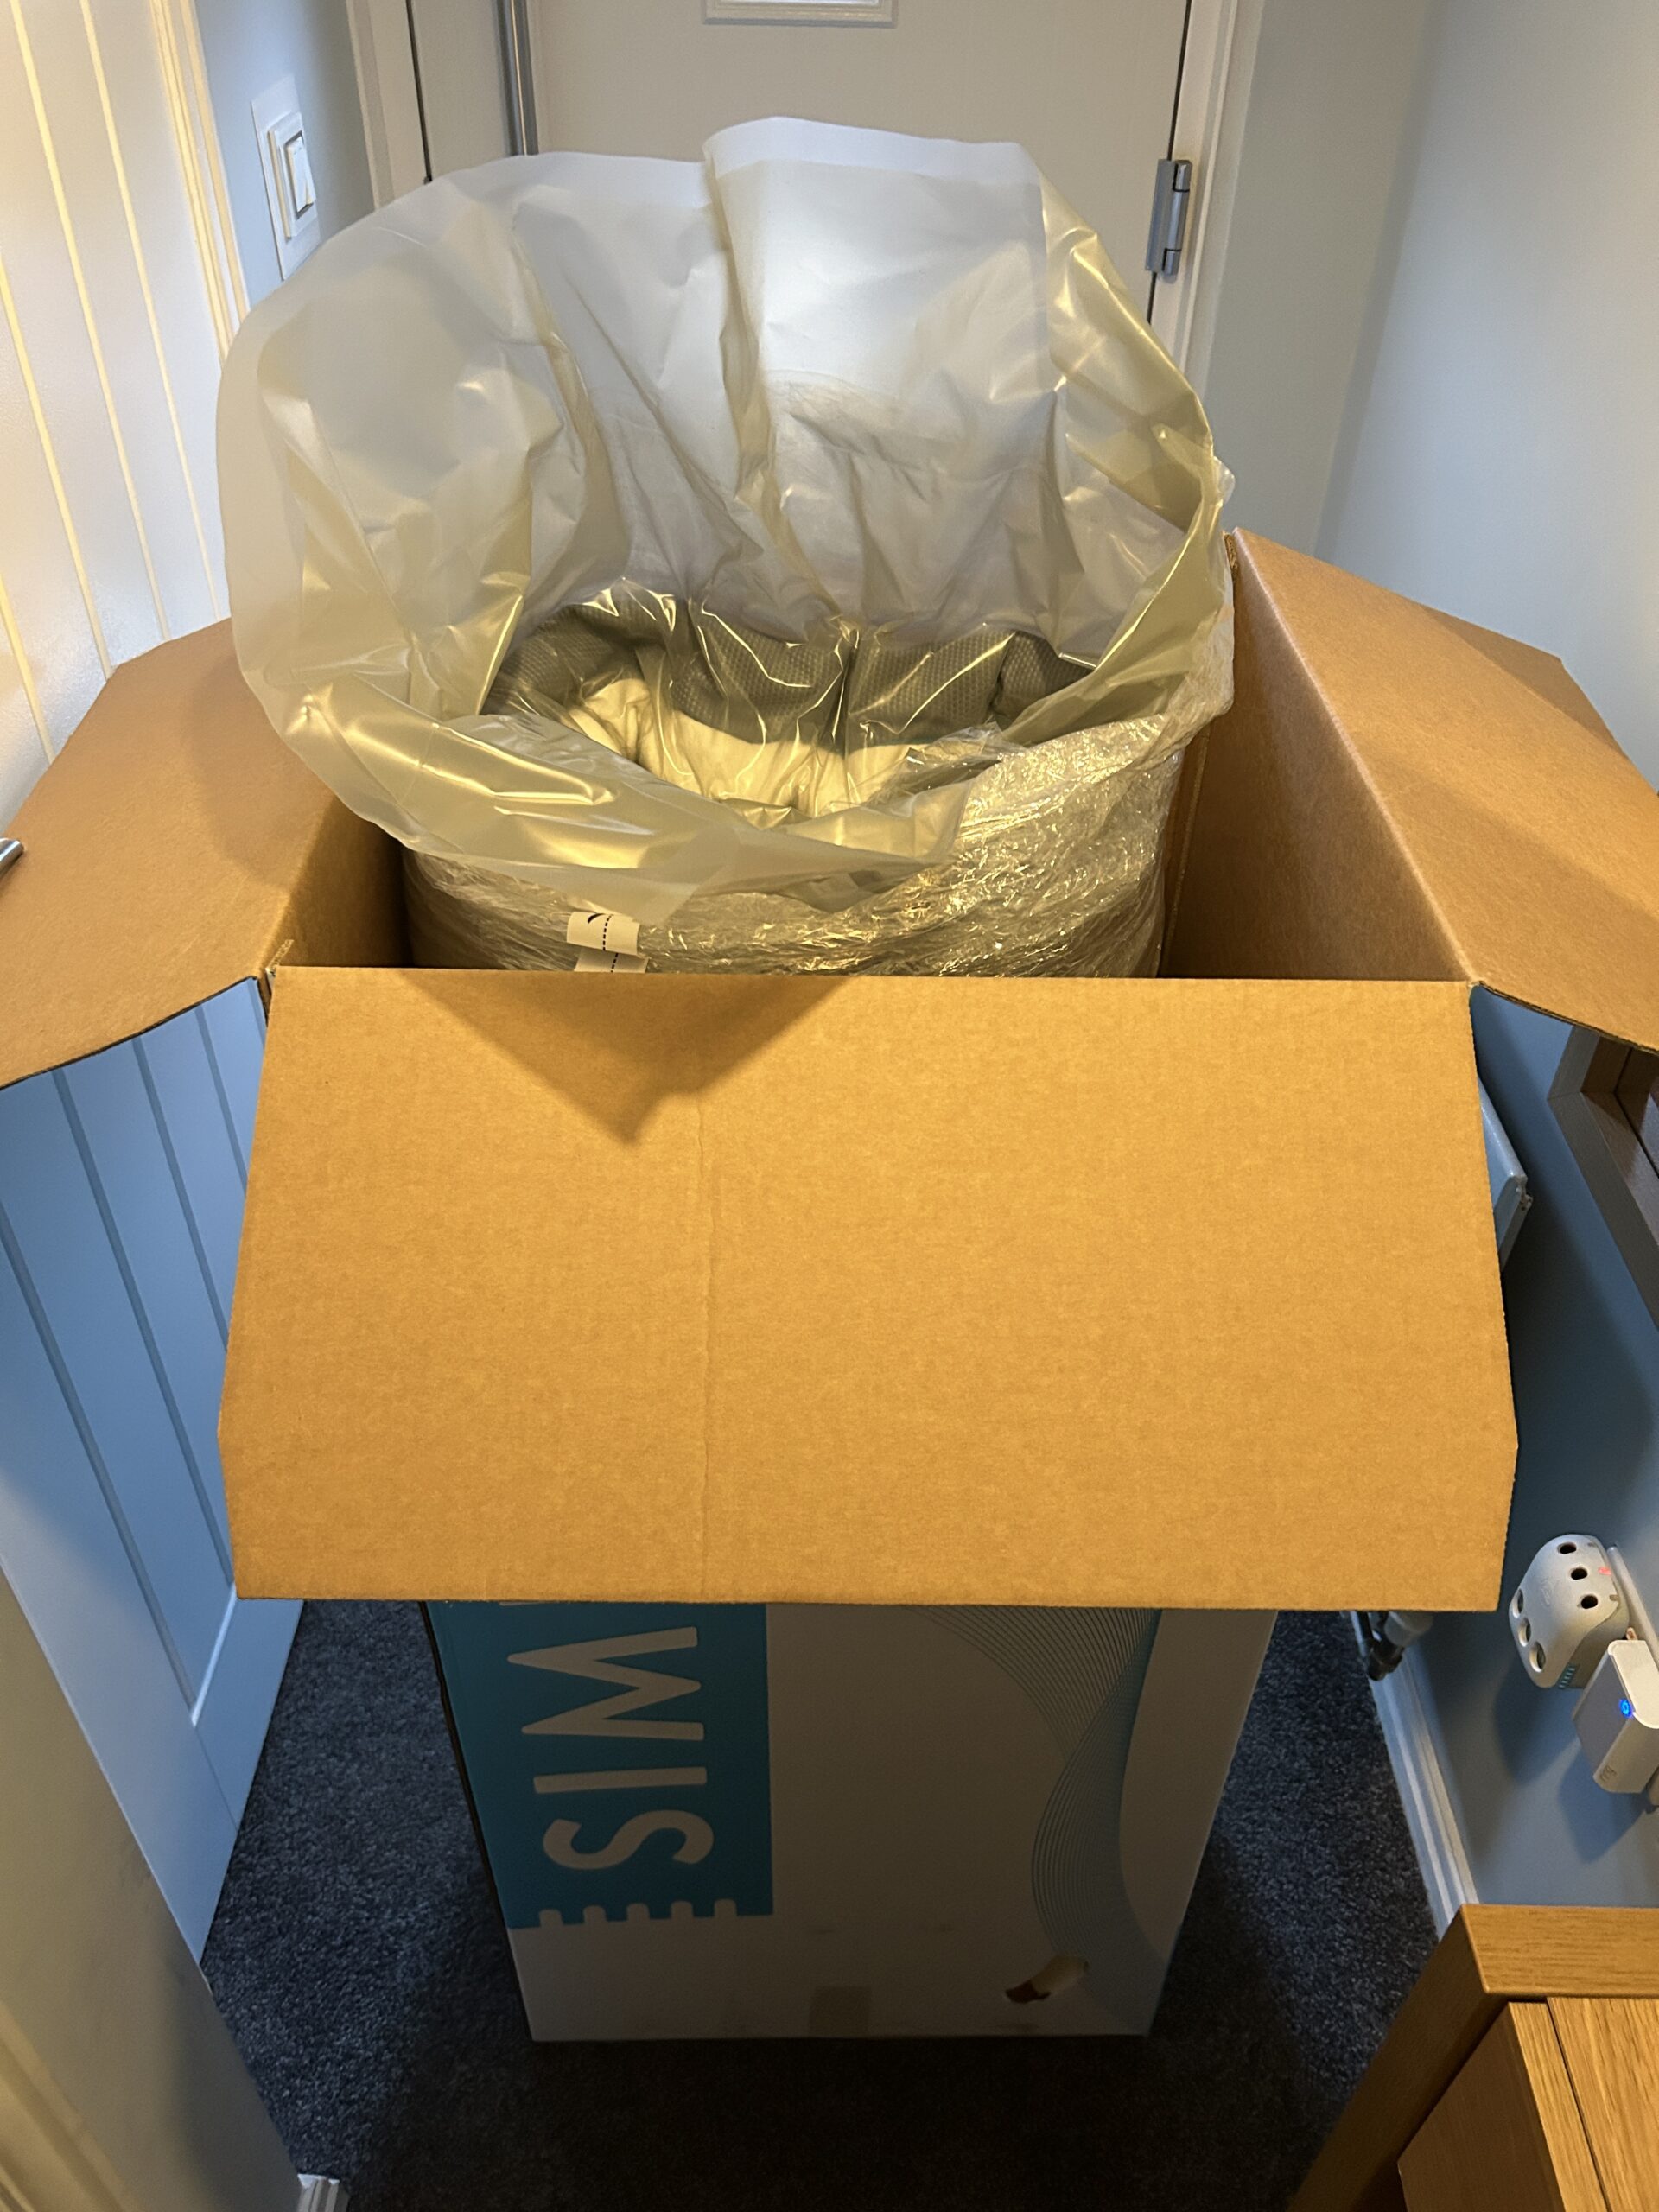 A large shipping box containing a Simba mattress stands open, revealing a thick protective plastic liner inside, set against a backdrop of a softly lit interior space.